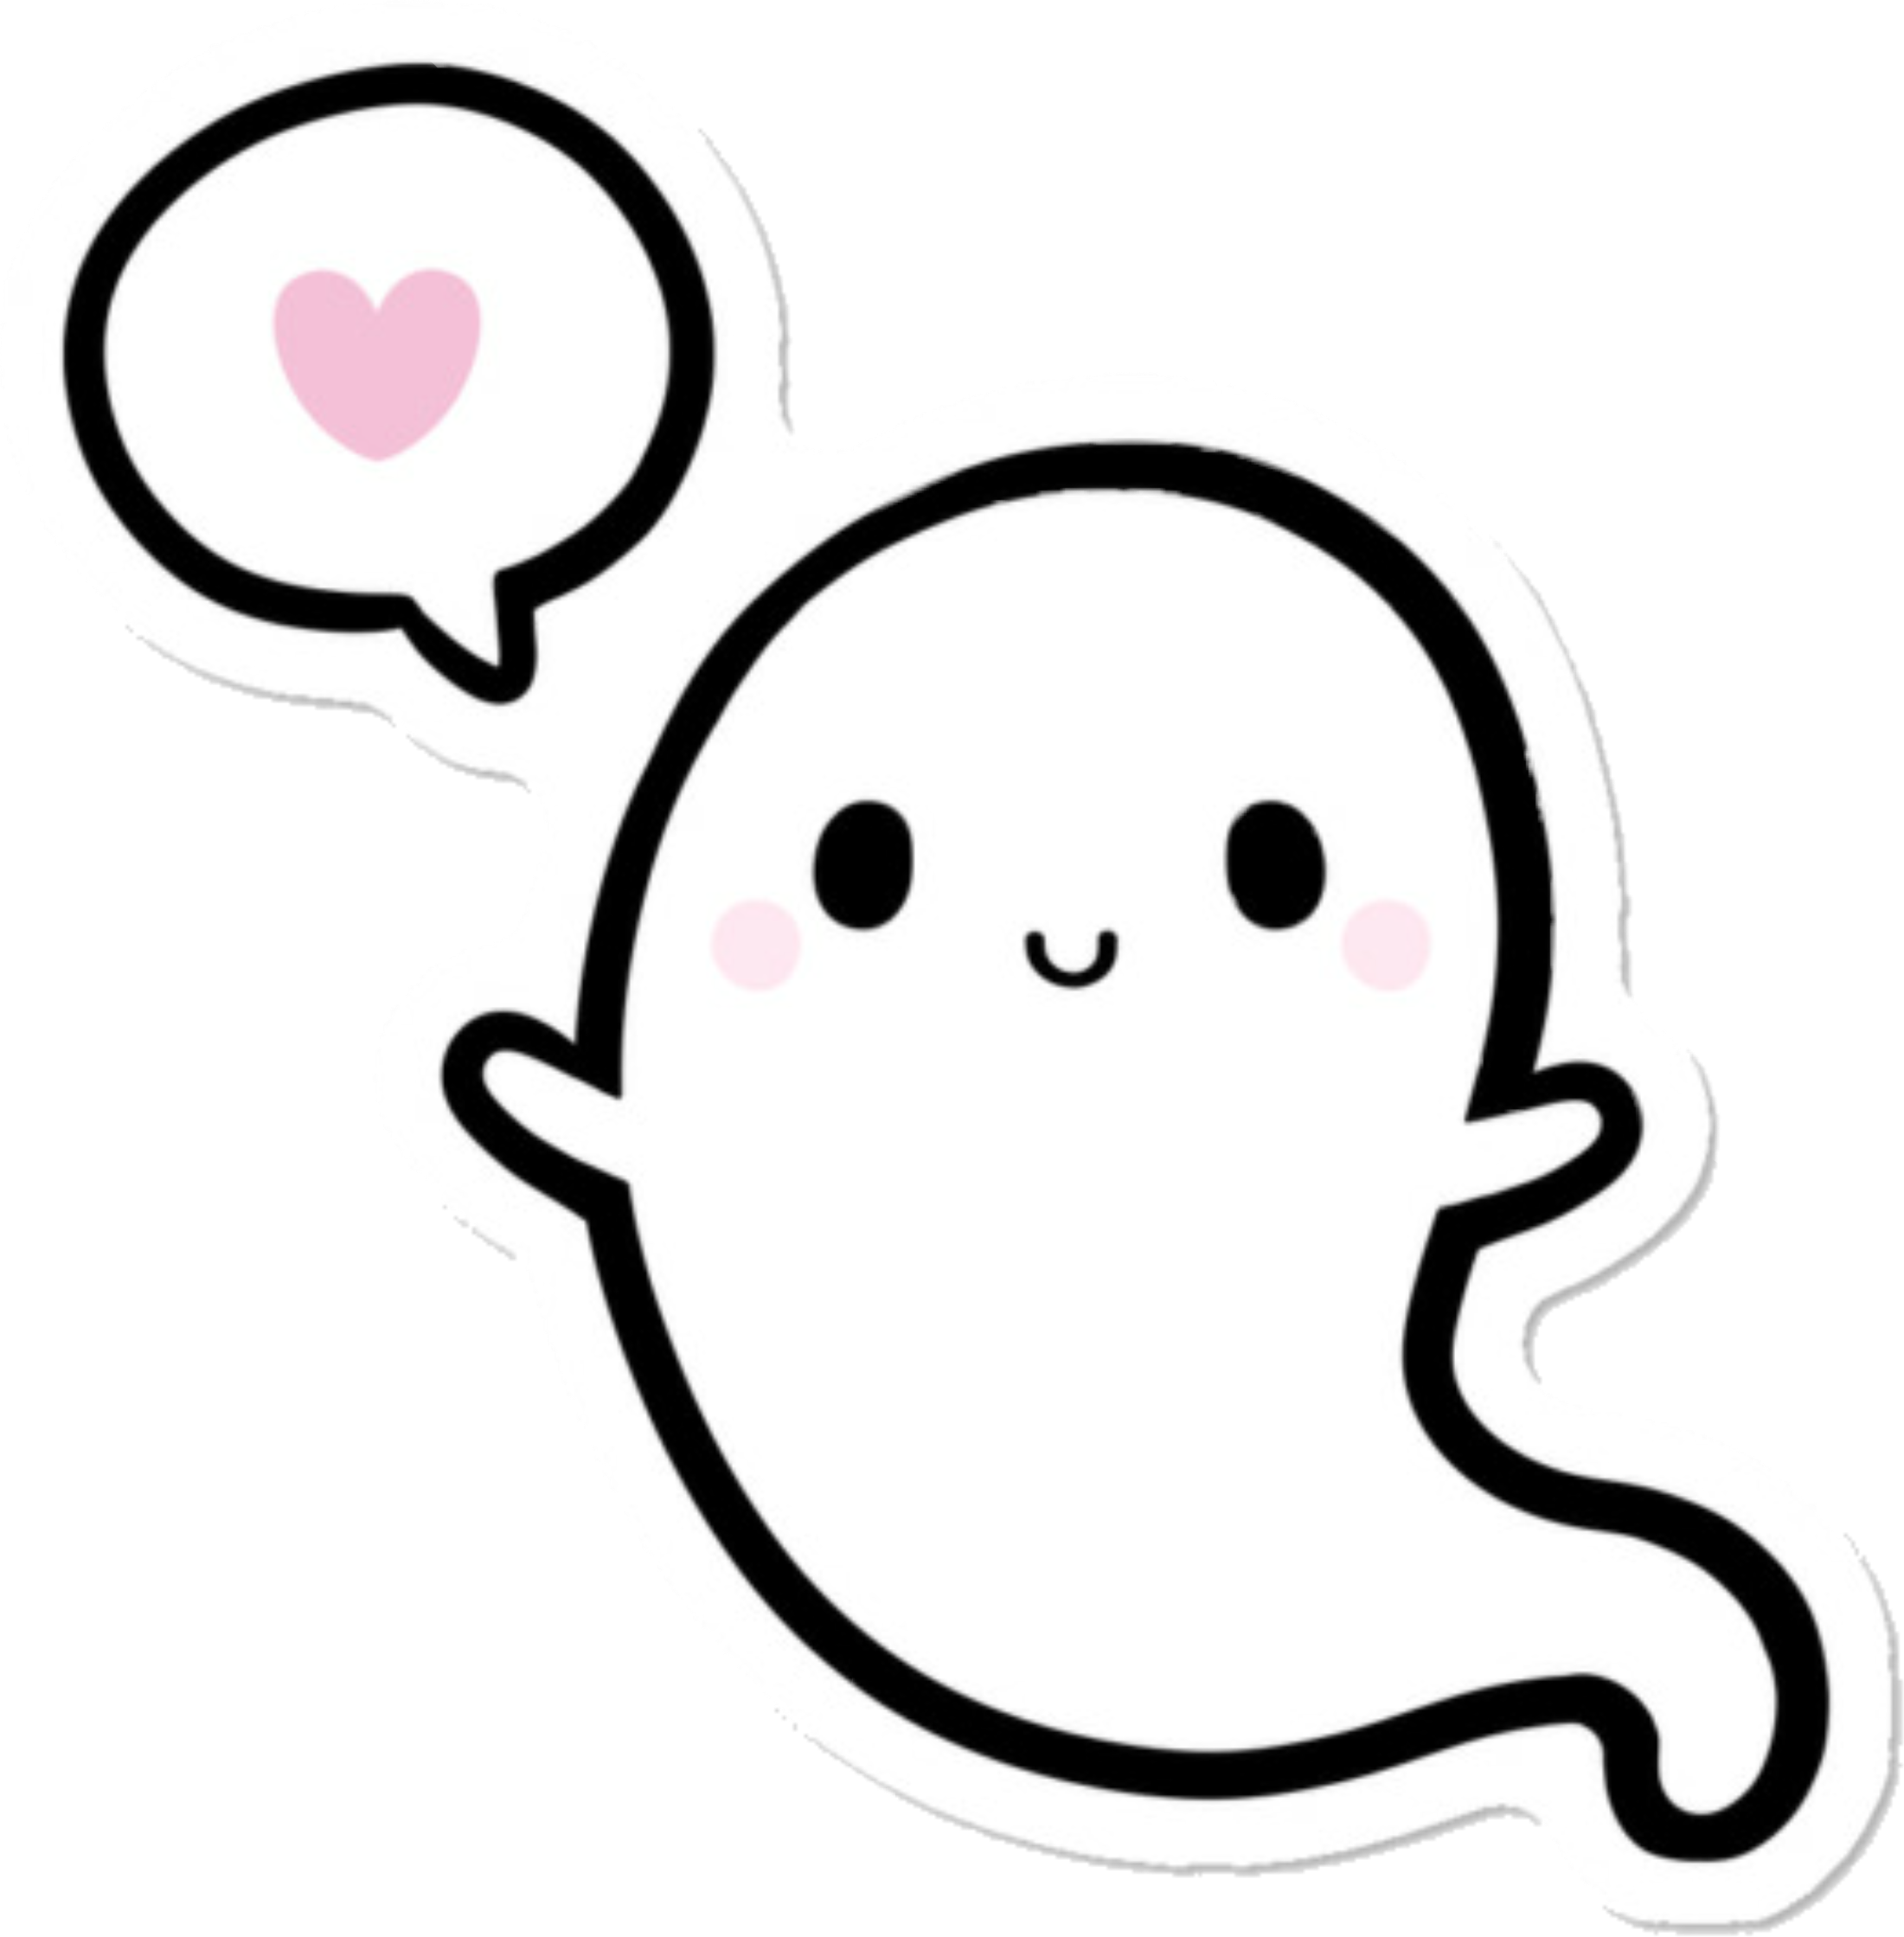 A Cartoon Ghost With A Heart And Speech Bubble